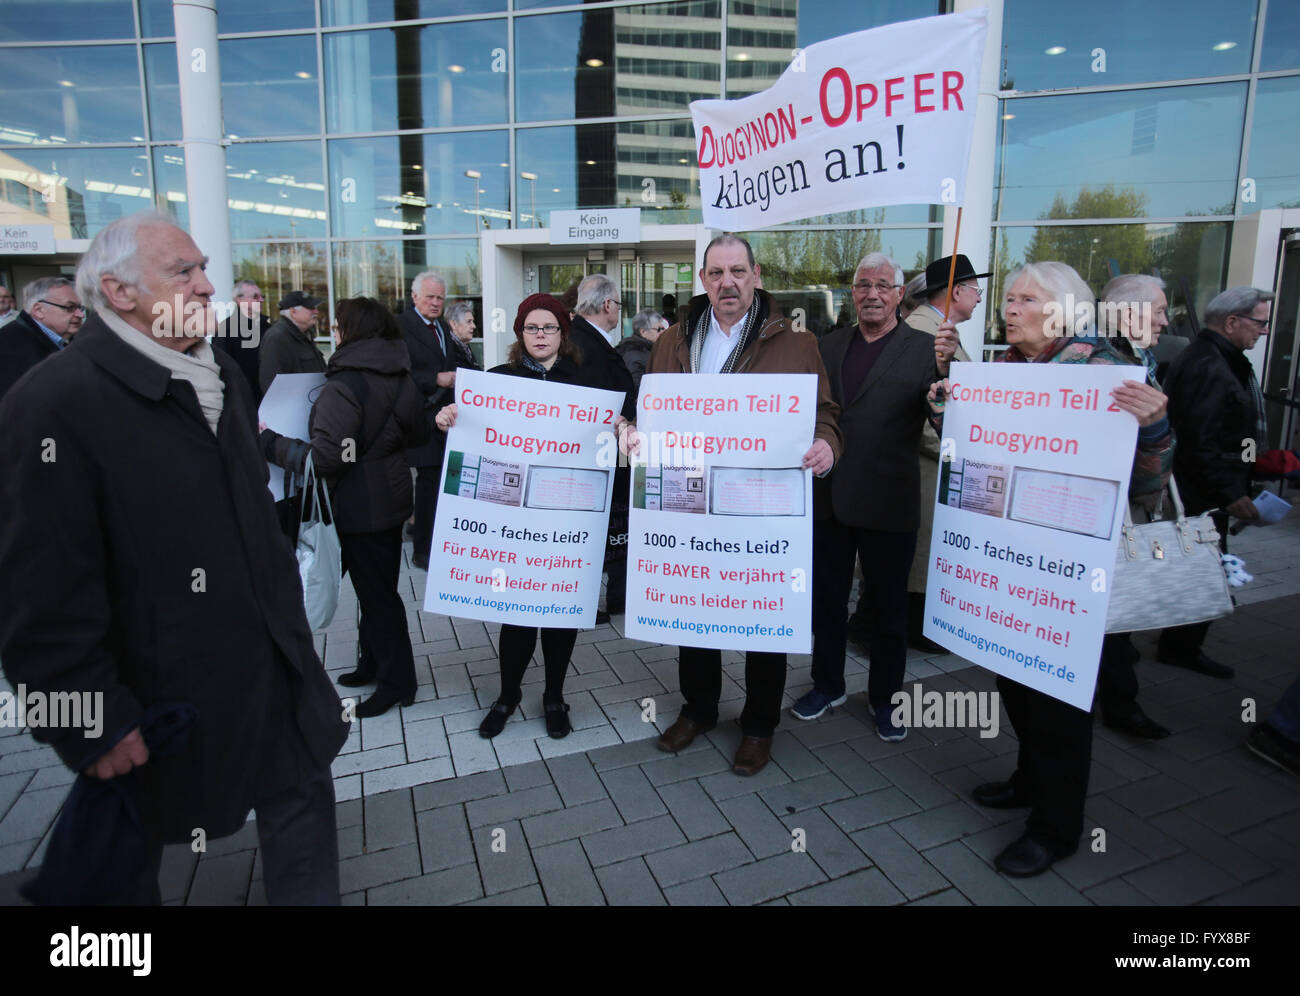 Cologne, Germany. 29th Apr, 2016. Participants holding posters reading 'Contergan Teil 2 - Duogynon 1000-faches Leid - Für Bayer verjährt, für uns leider nie' during a demonstration during the general assembly of Bayer in Cologne, Germany, 29 April 2016. PHOTO: OLIVER BERG/dpa/Alamy Live News Stock Photo